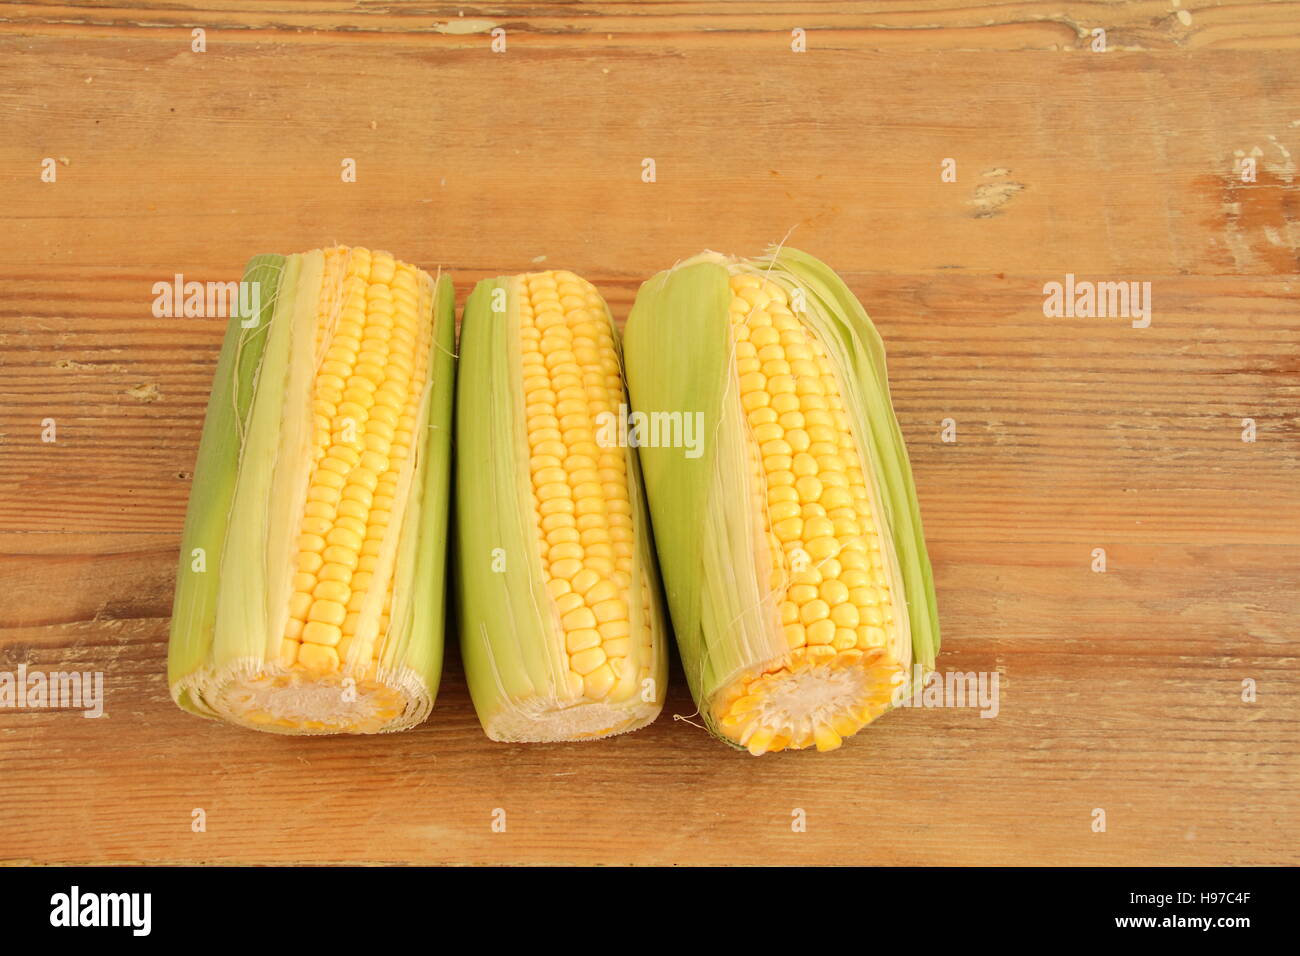 Corn on the cob isolated on a wooden surface image in landscape format with copy space Stock Photo